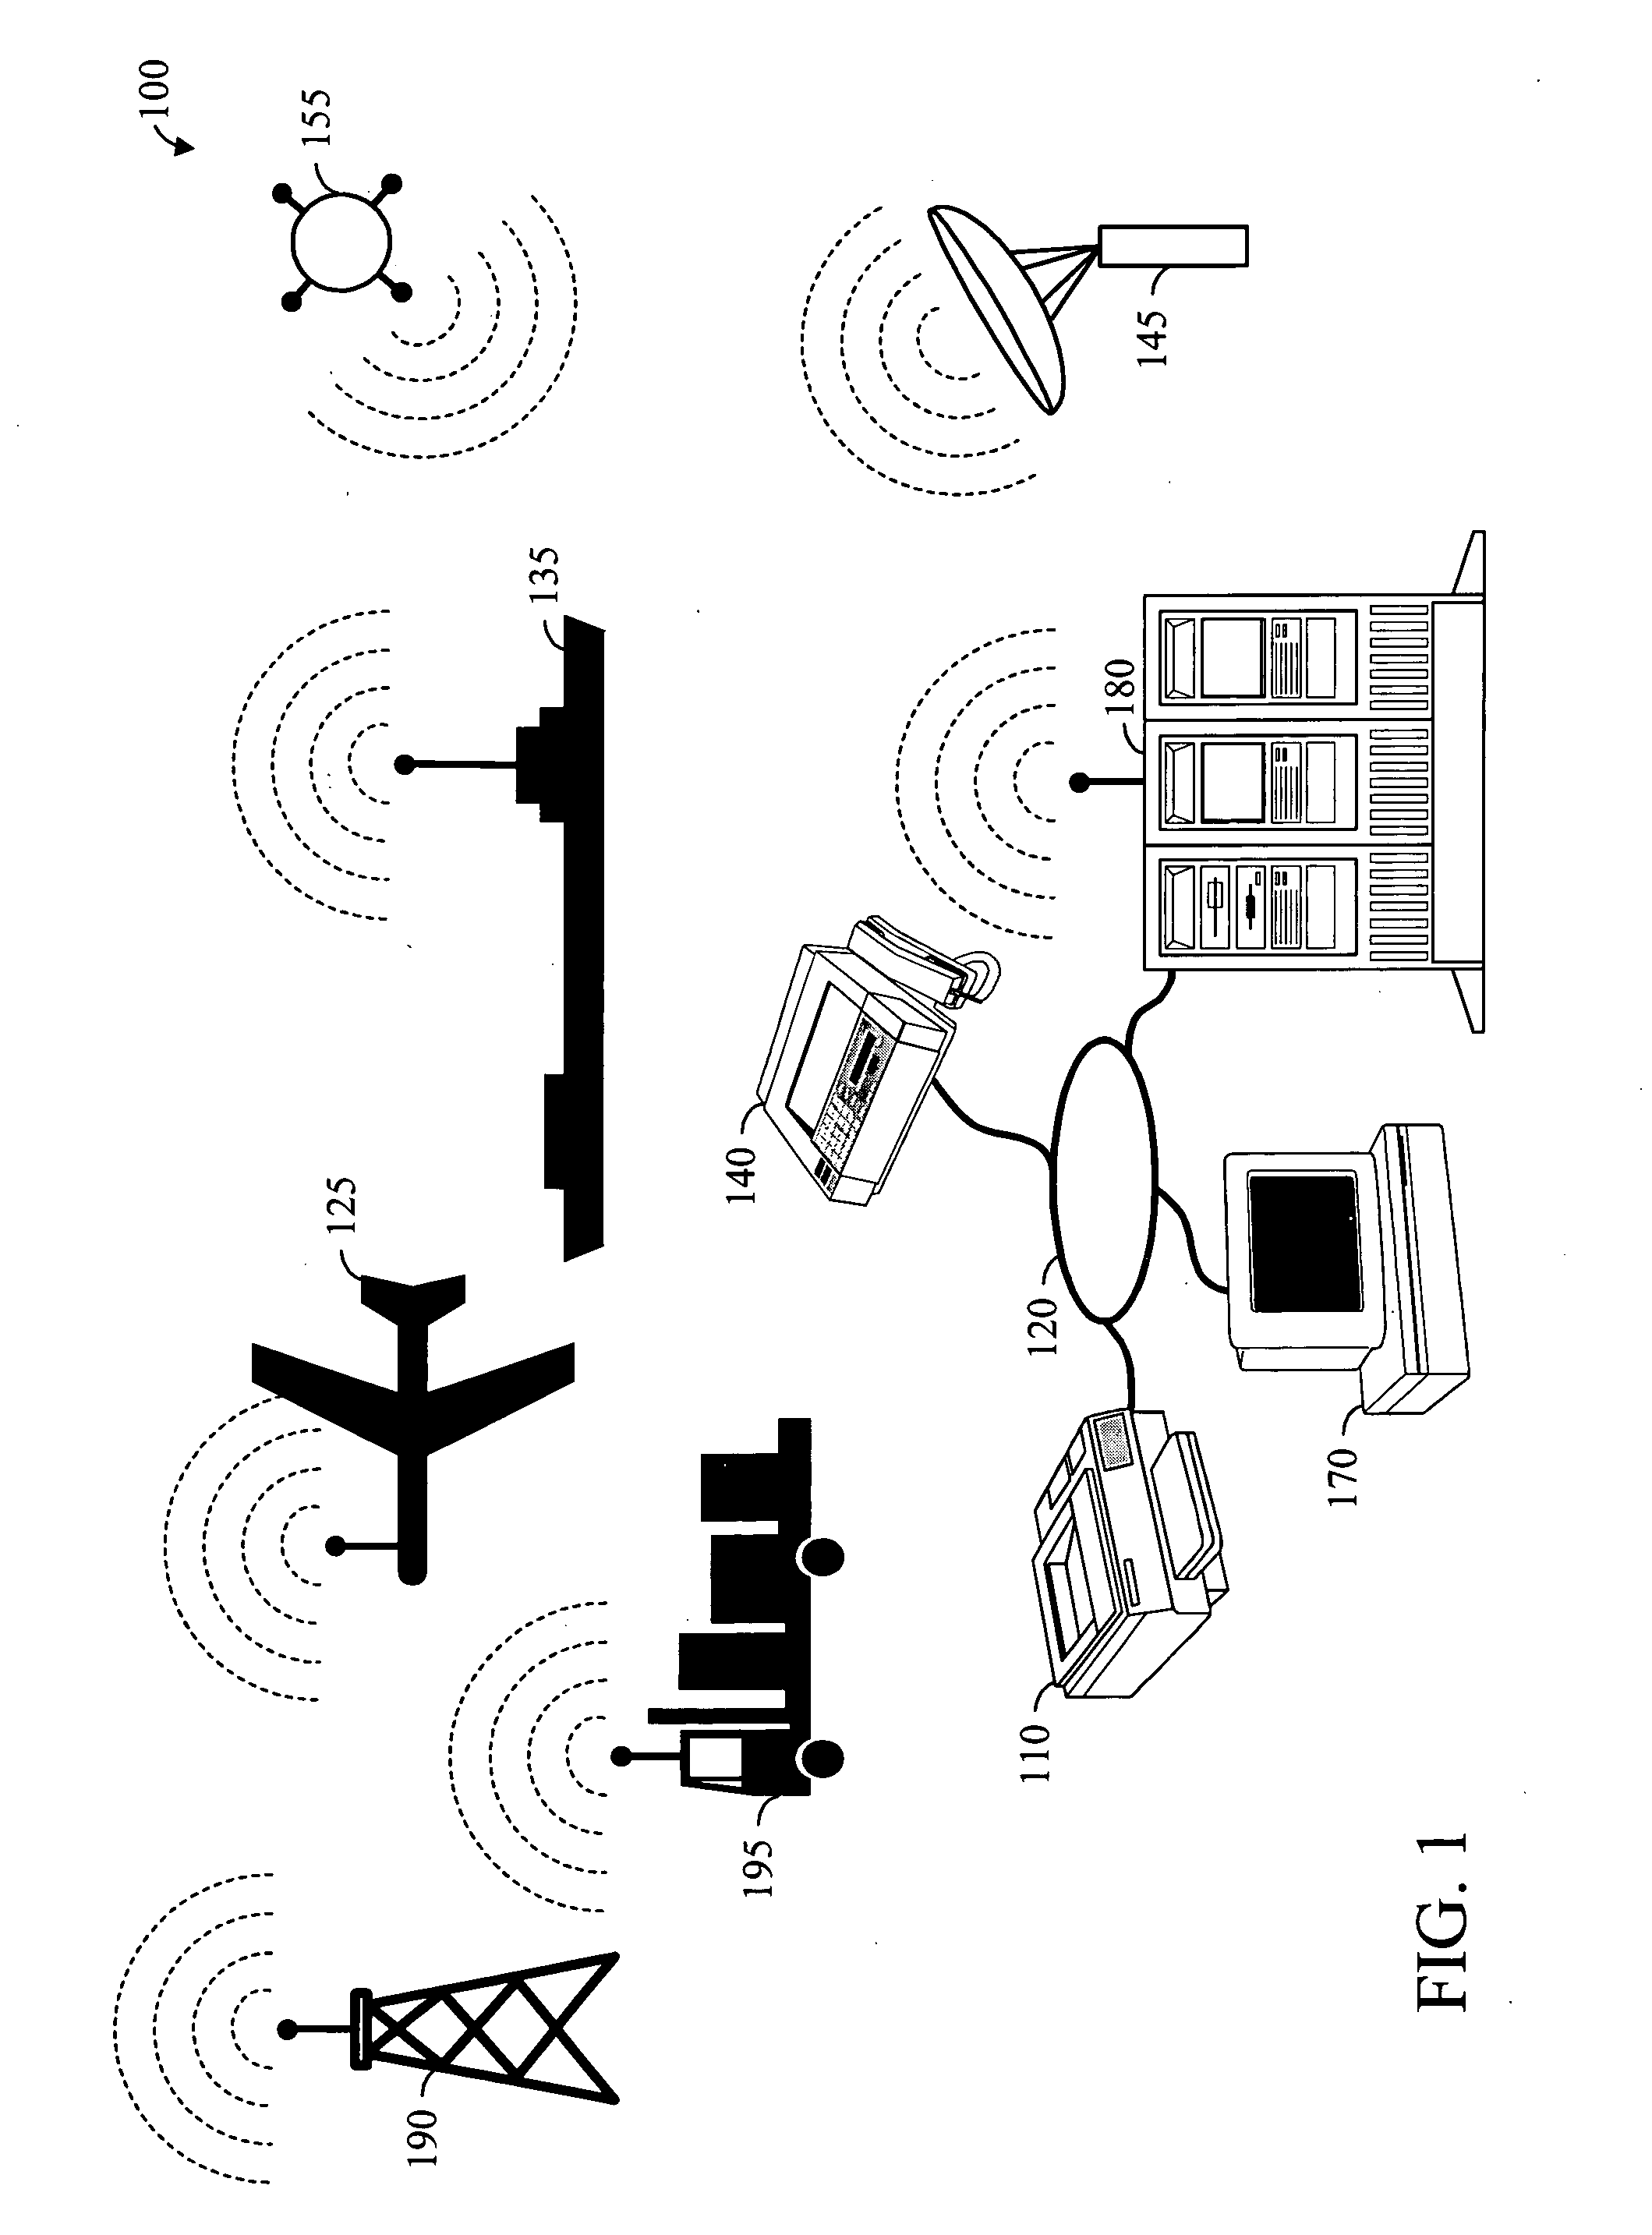 Apparatus and method for monitoring in-transit shipments